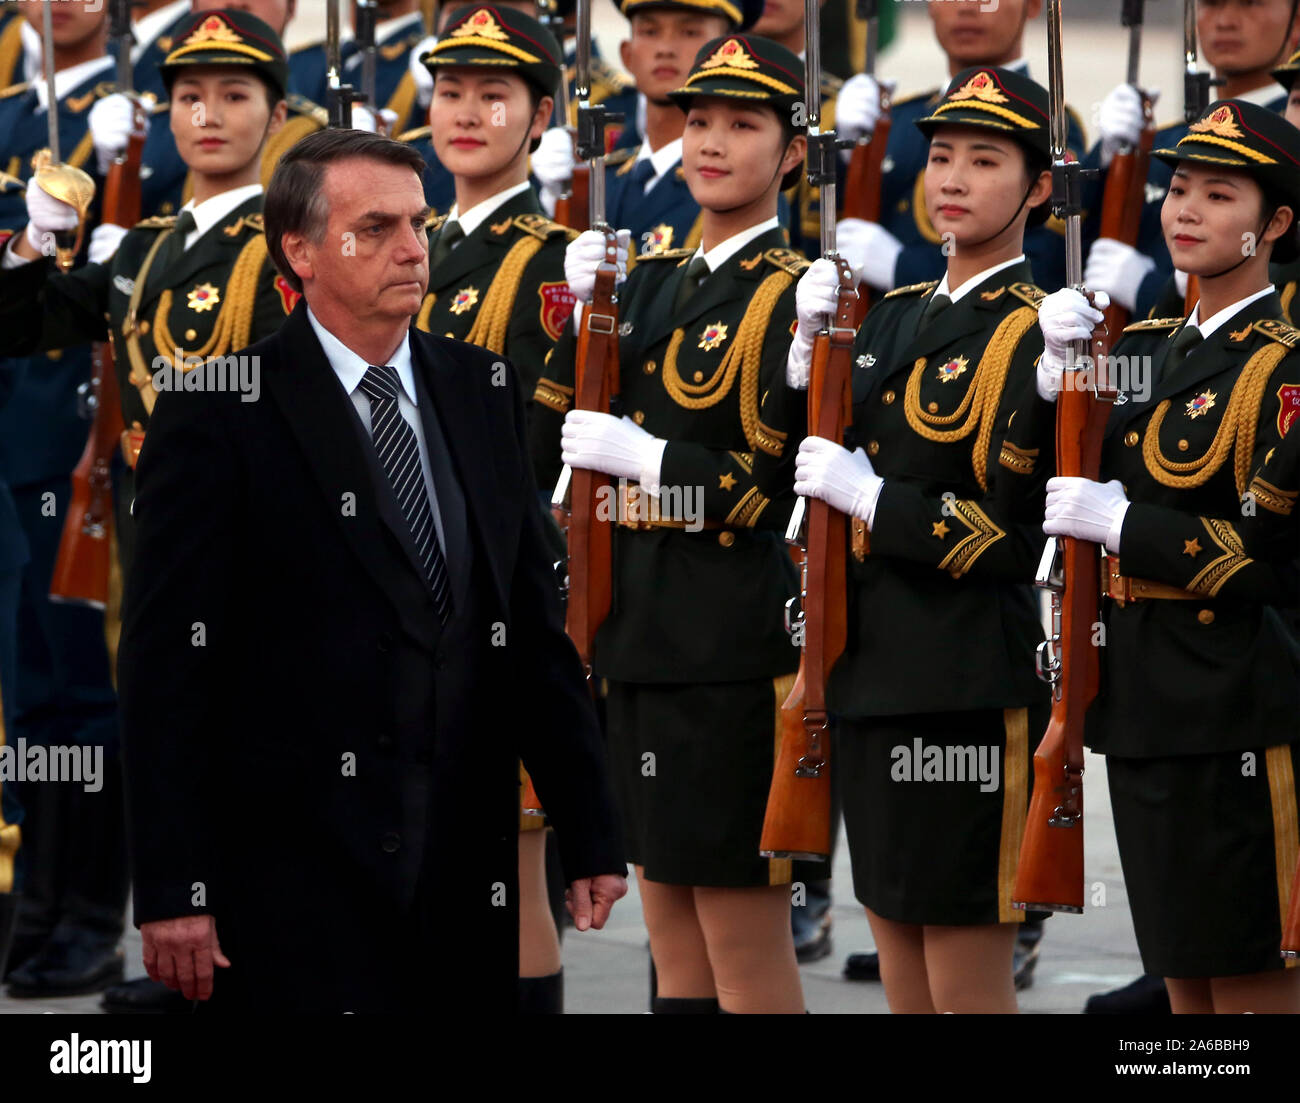 Beijing, China. 25th Oct, 2019. Brazilian President Jair Bolsonaro inspects a military honor guard during a welcoming ceremony at the Great Hall of the People in Beijing on Friday, October 25, 2019. Bolsonaro told a forum that China and Brazil 'were born to walk together' and the two governments are 'completely aligned in a way that reaches beyond our commercial and business relationship.' Photo by Stephen Shaver/UPI Credit: UPI/Alamy Live News Stock Photo